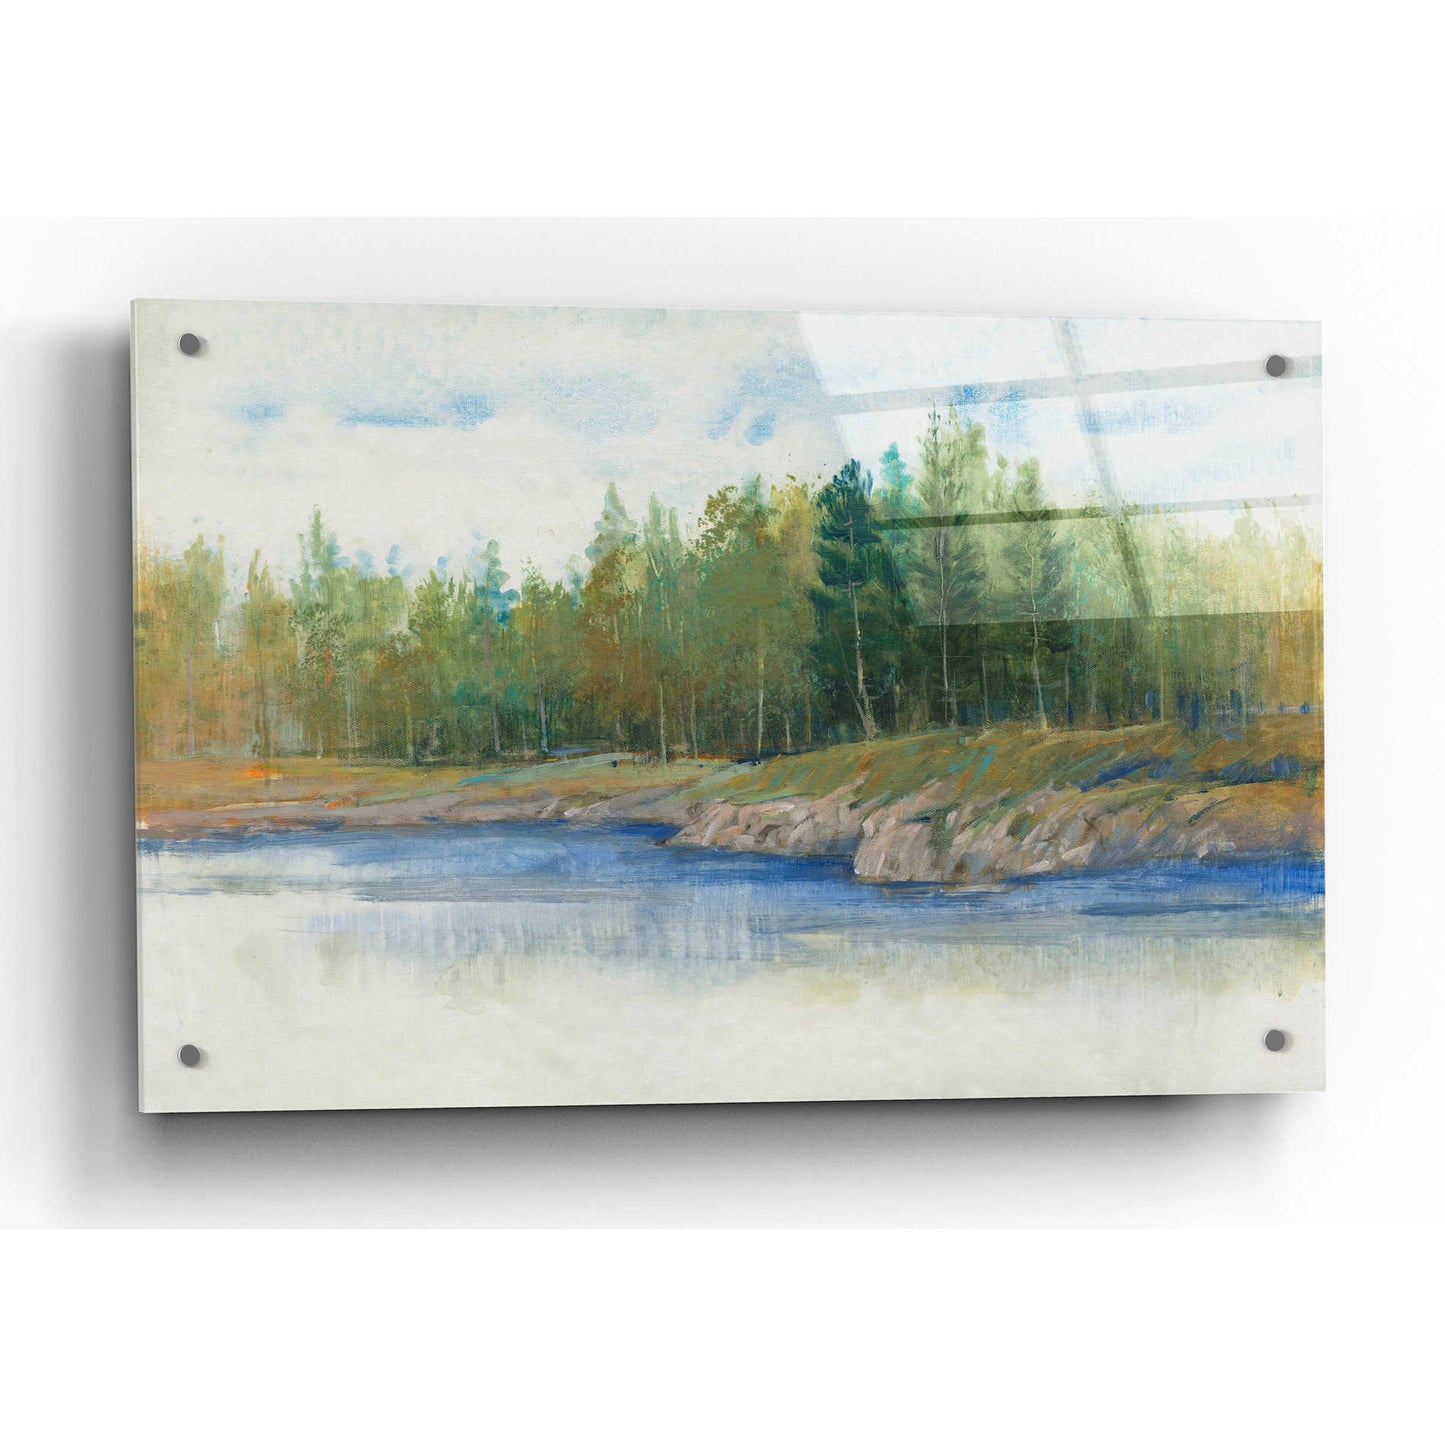 Epic Art 'From the Banks II' by Tim O'Toole, Acrylic Glass Wall Art,36x24